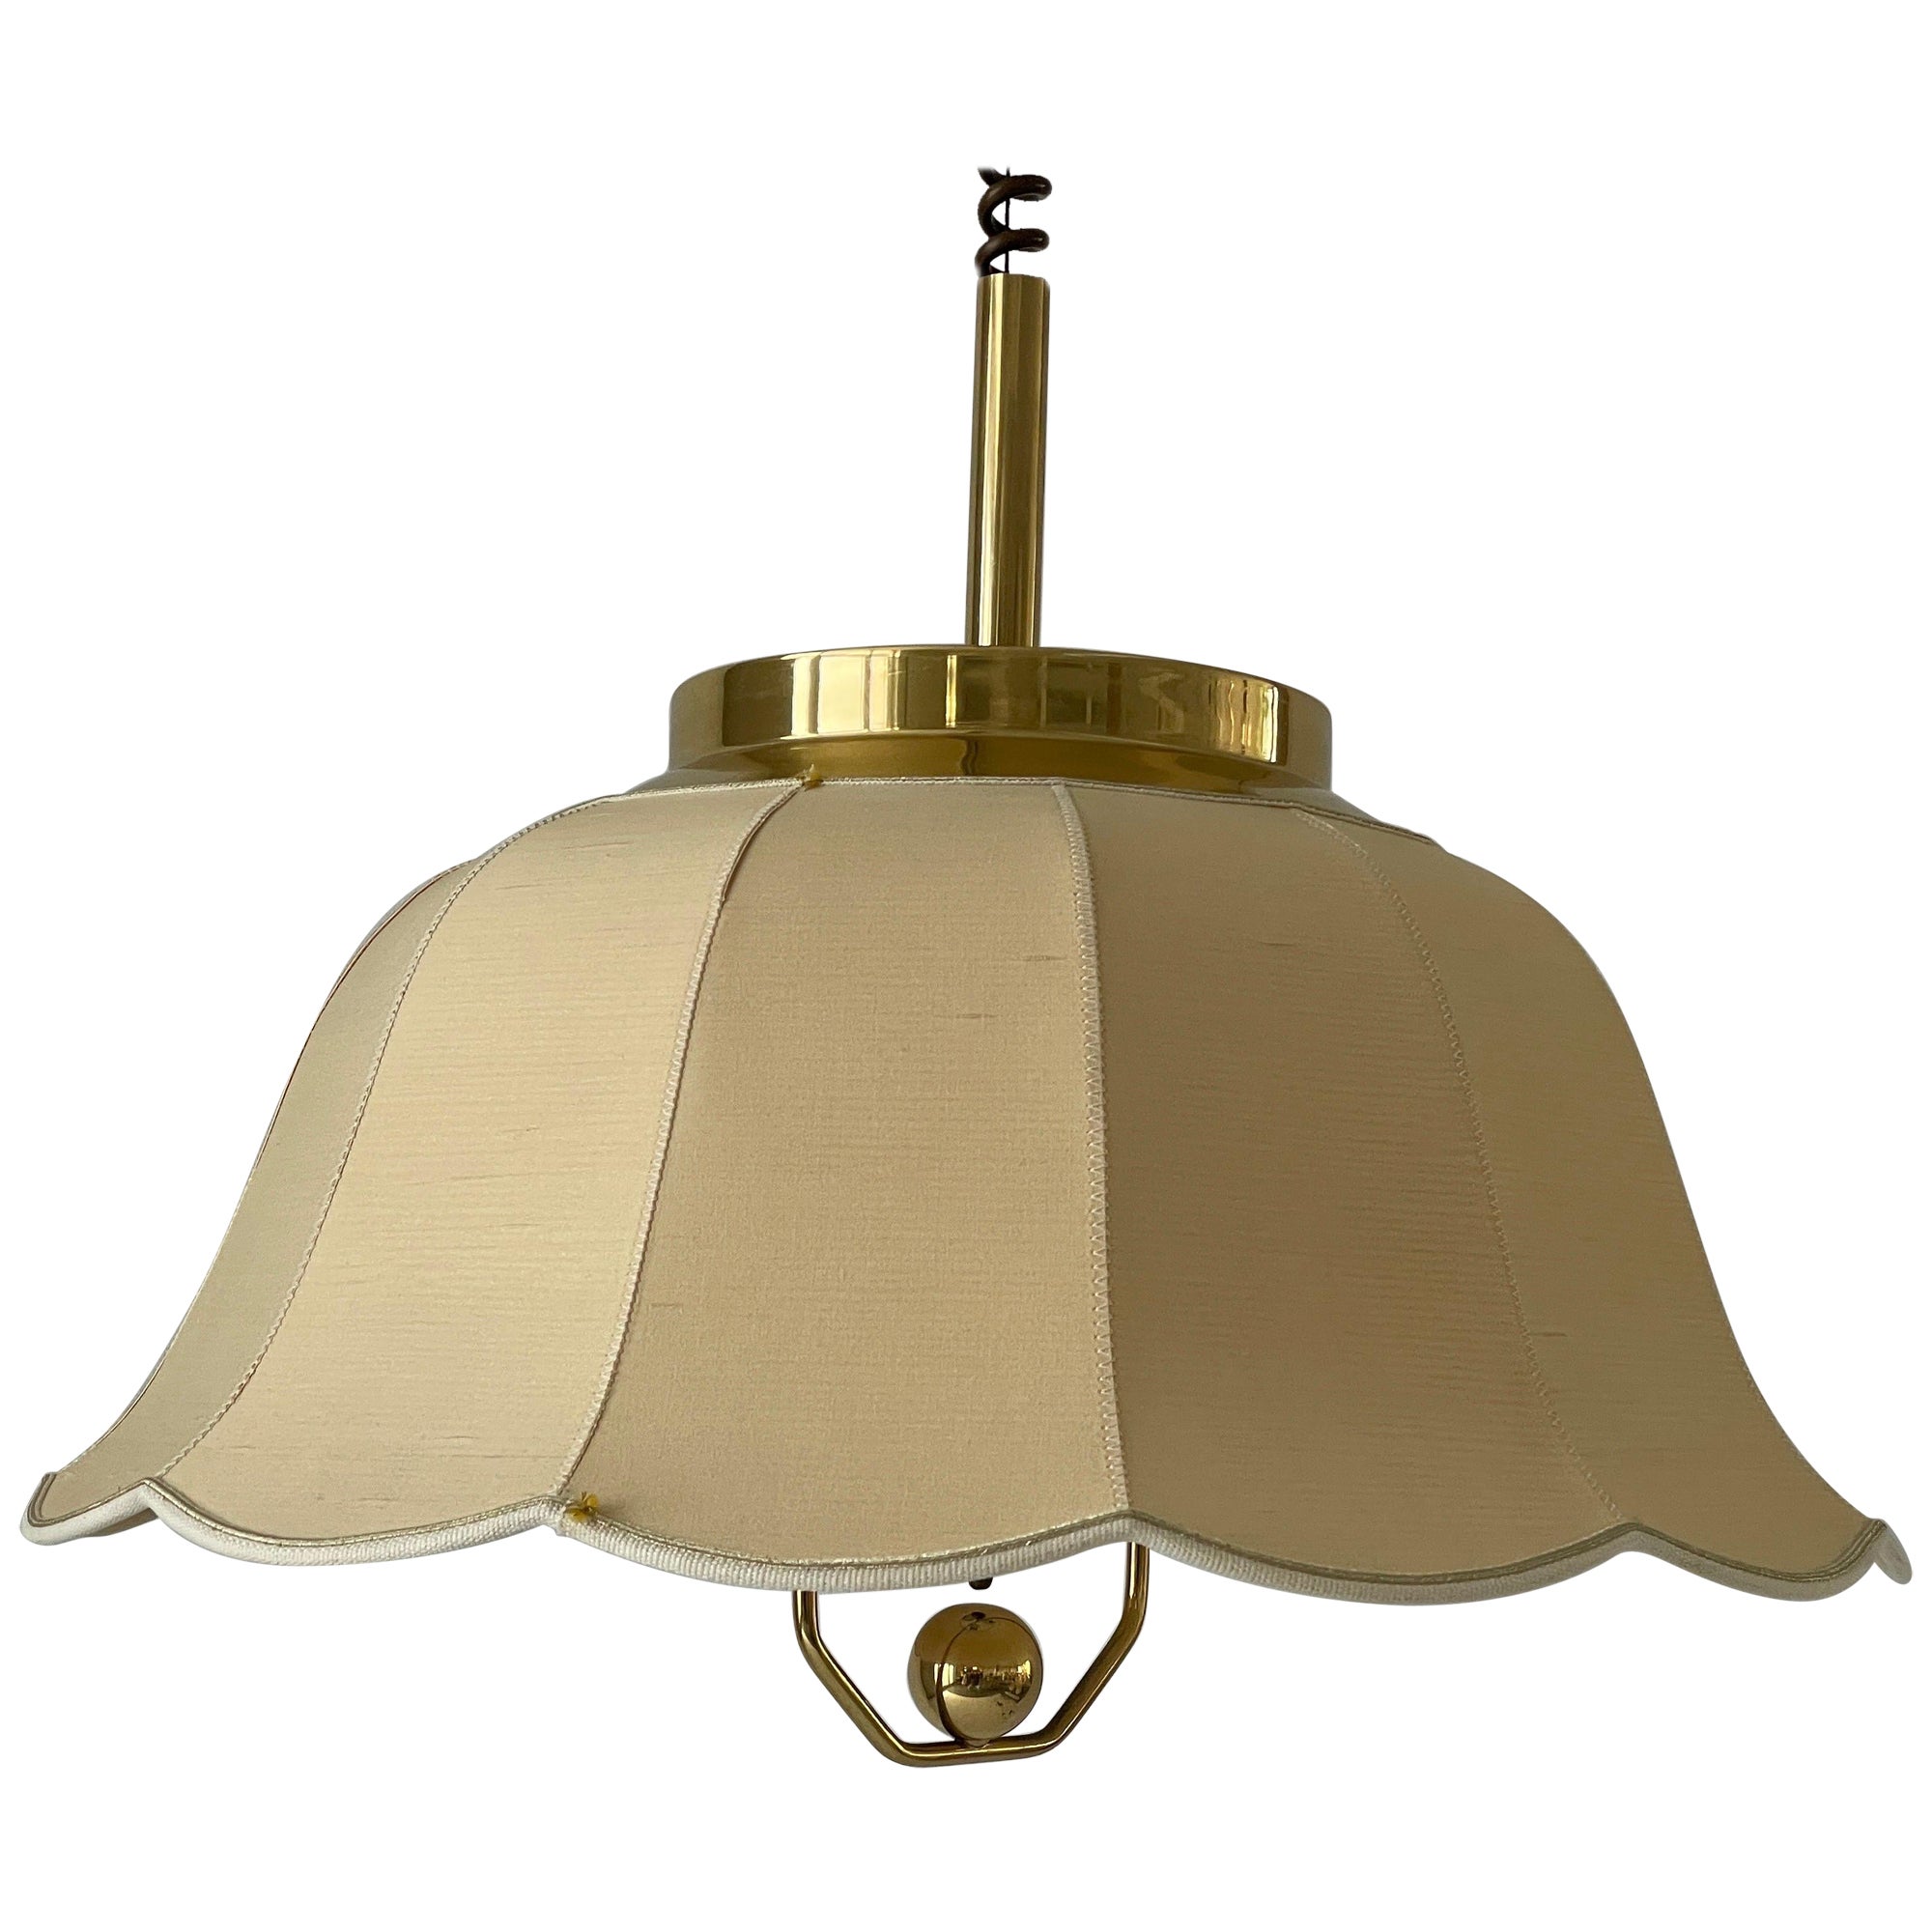 Fabric and Brass 5 socket Adjustable Shade Pendant Lamp by WKR, 1970s, Germany For Sale